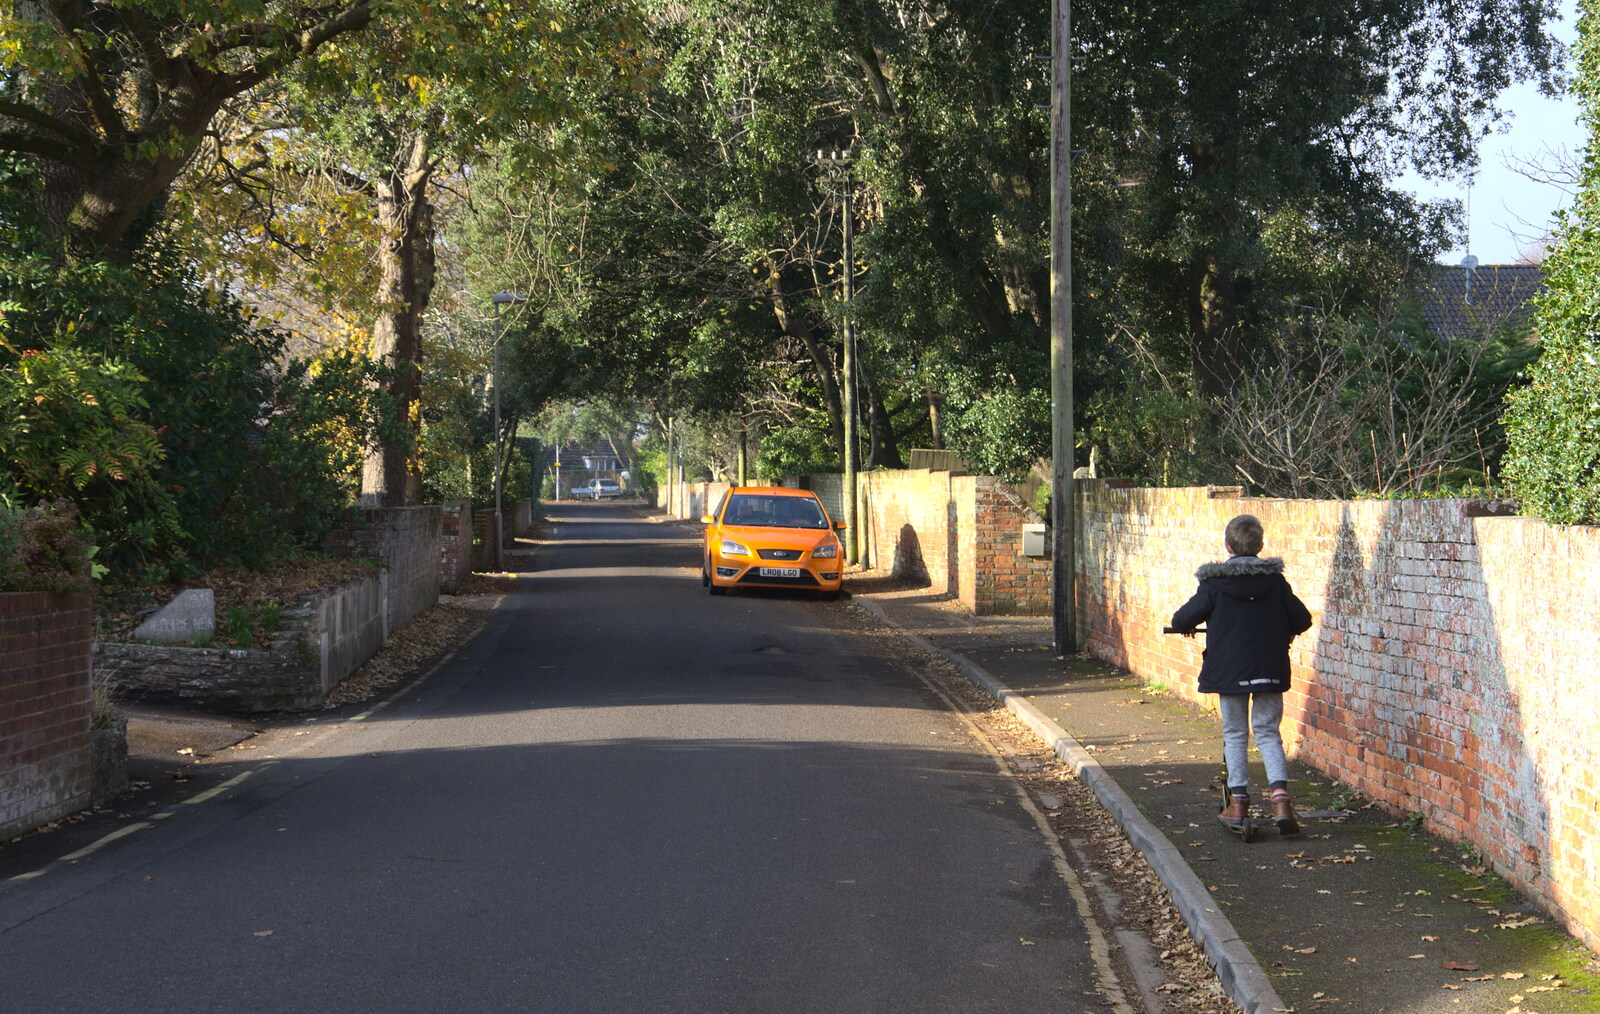 Scooting on a leafy lane from Thanksgiving in Highcliffe, Dorset - 23rd November 2018